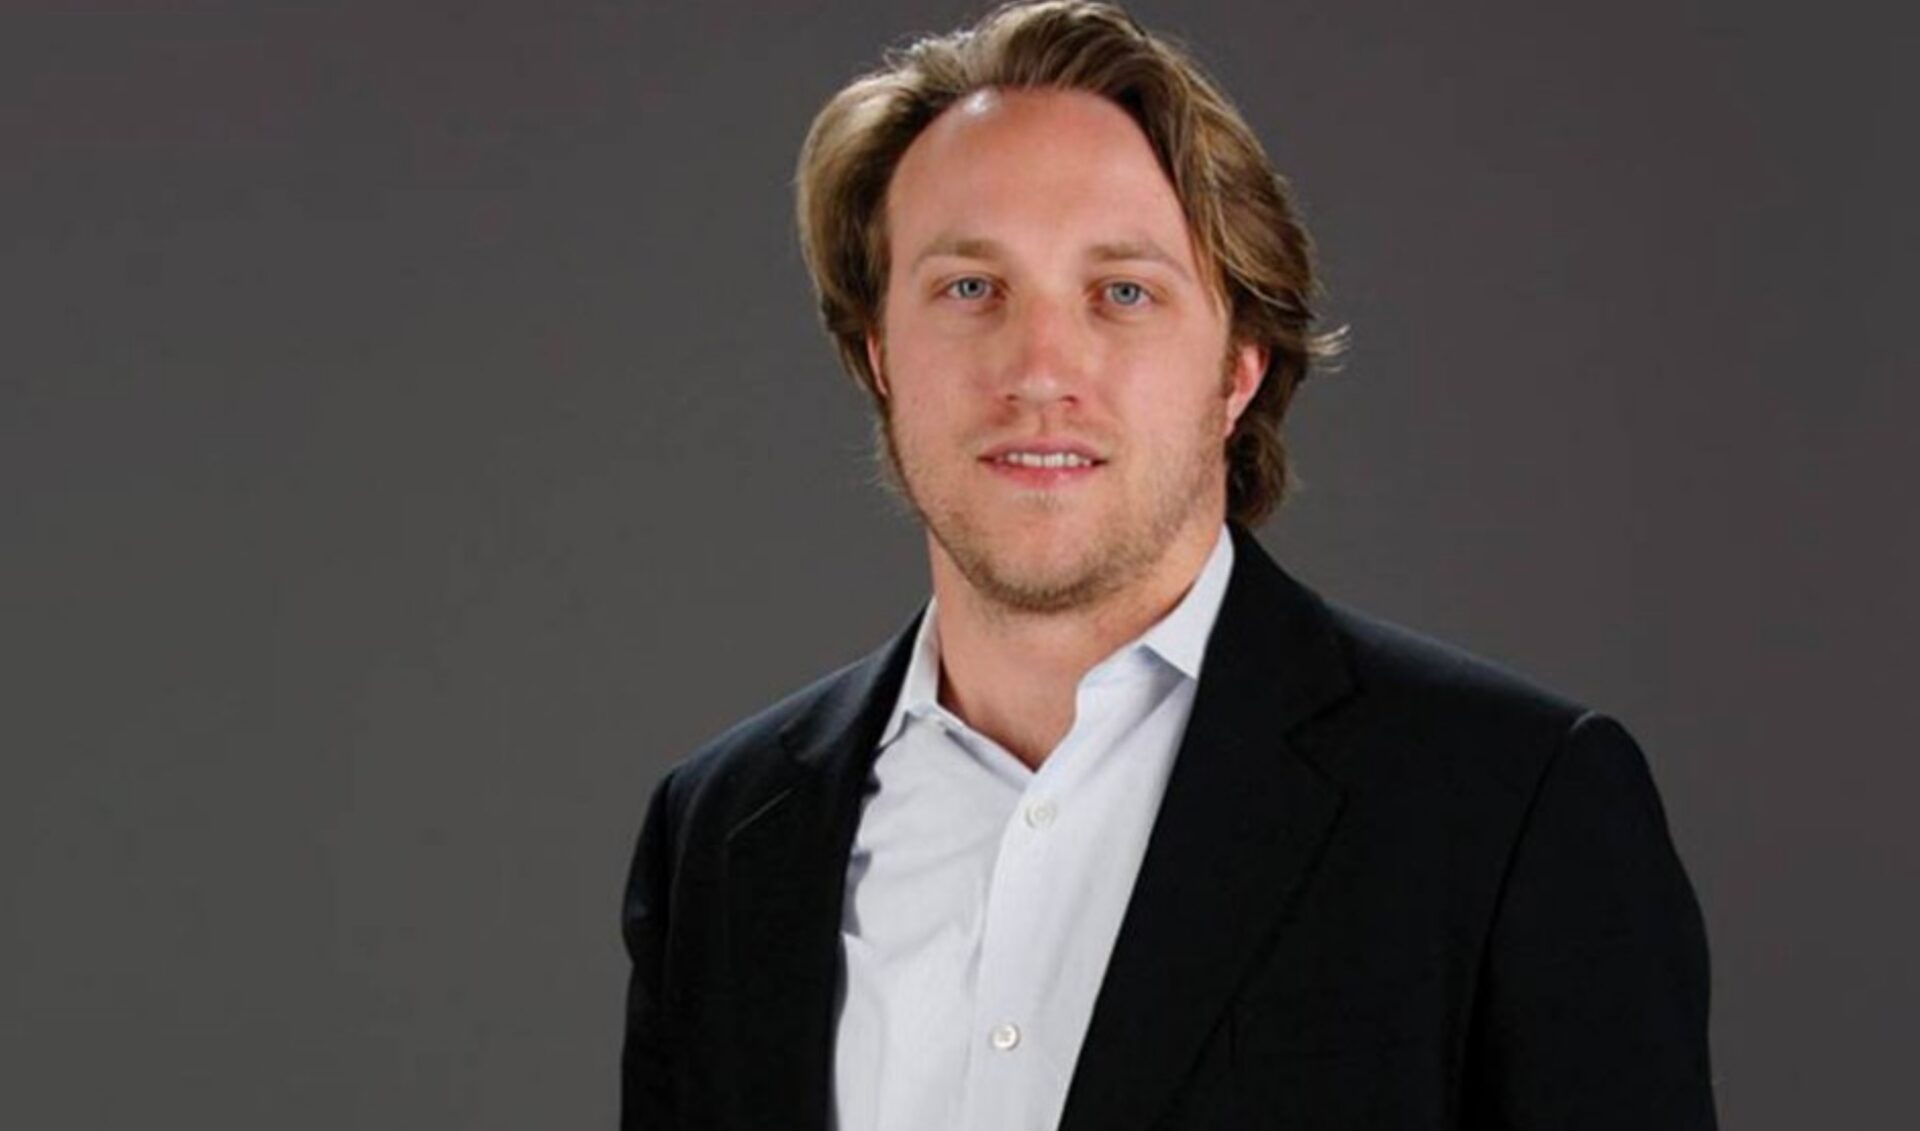 YouTube Co-Founder Chad Hurley has a new company based around AI-generated video scripts